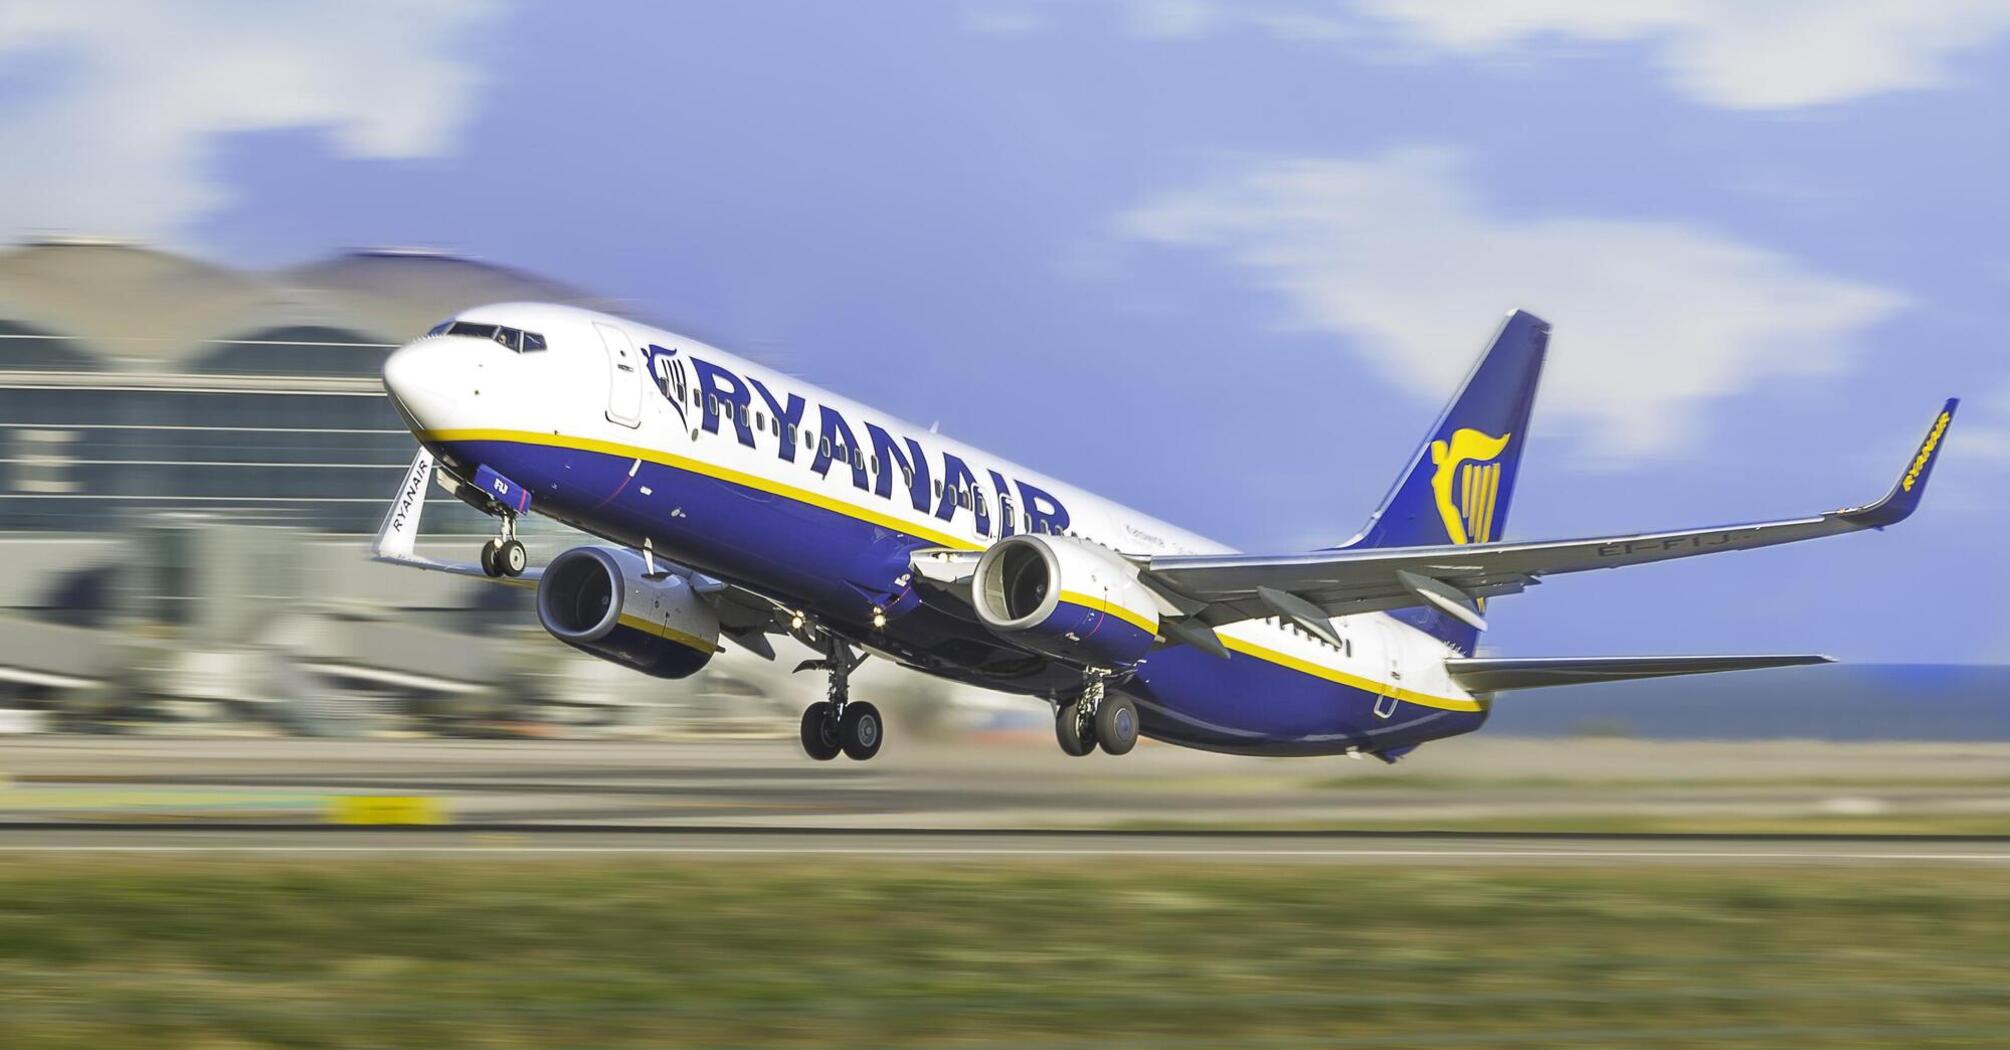 Ryanair airplane taking off from the runway